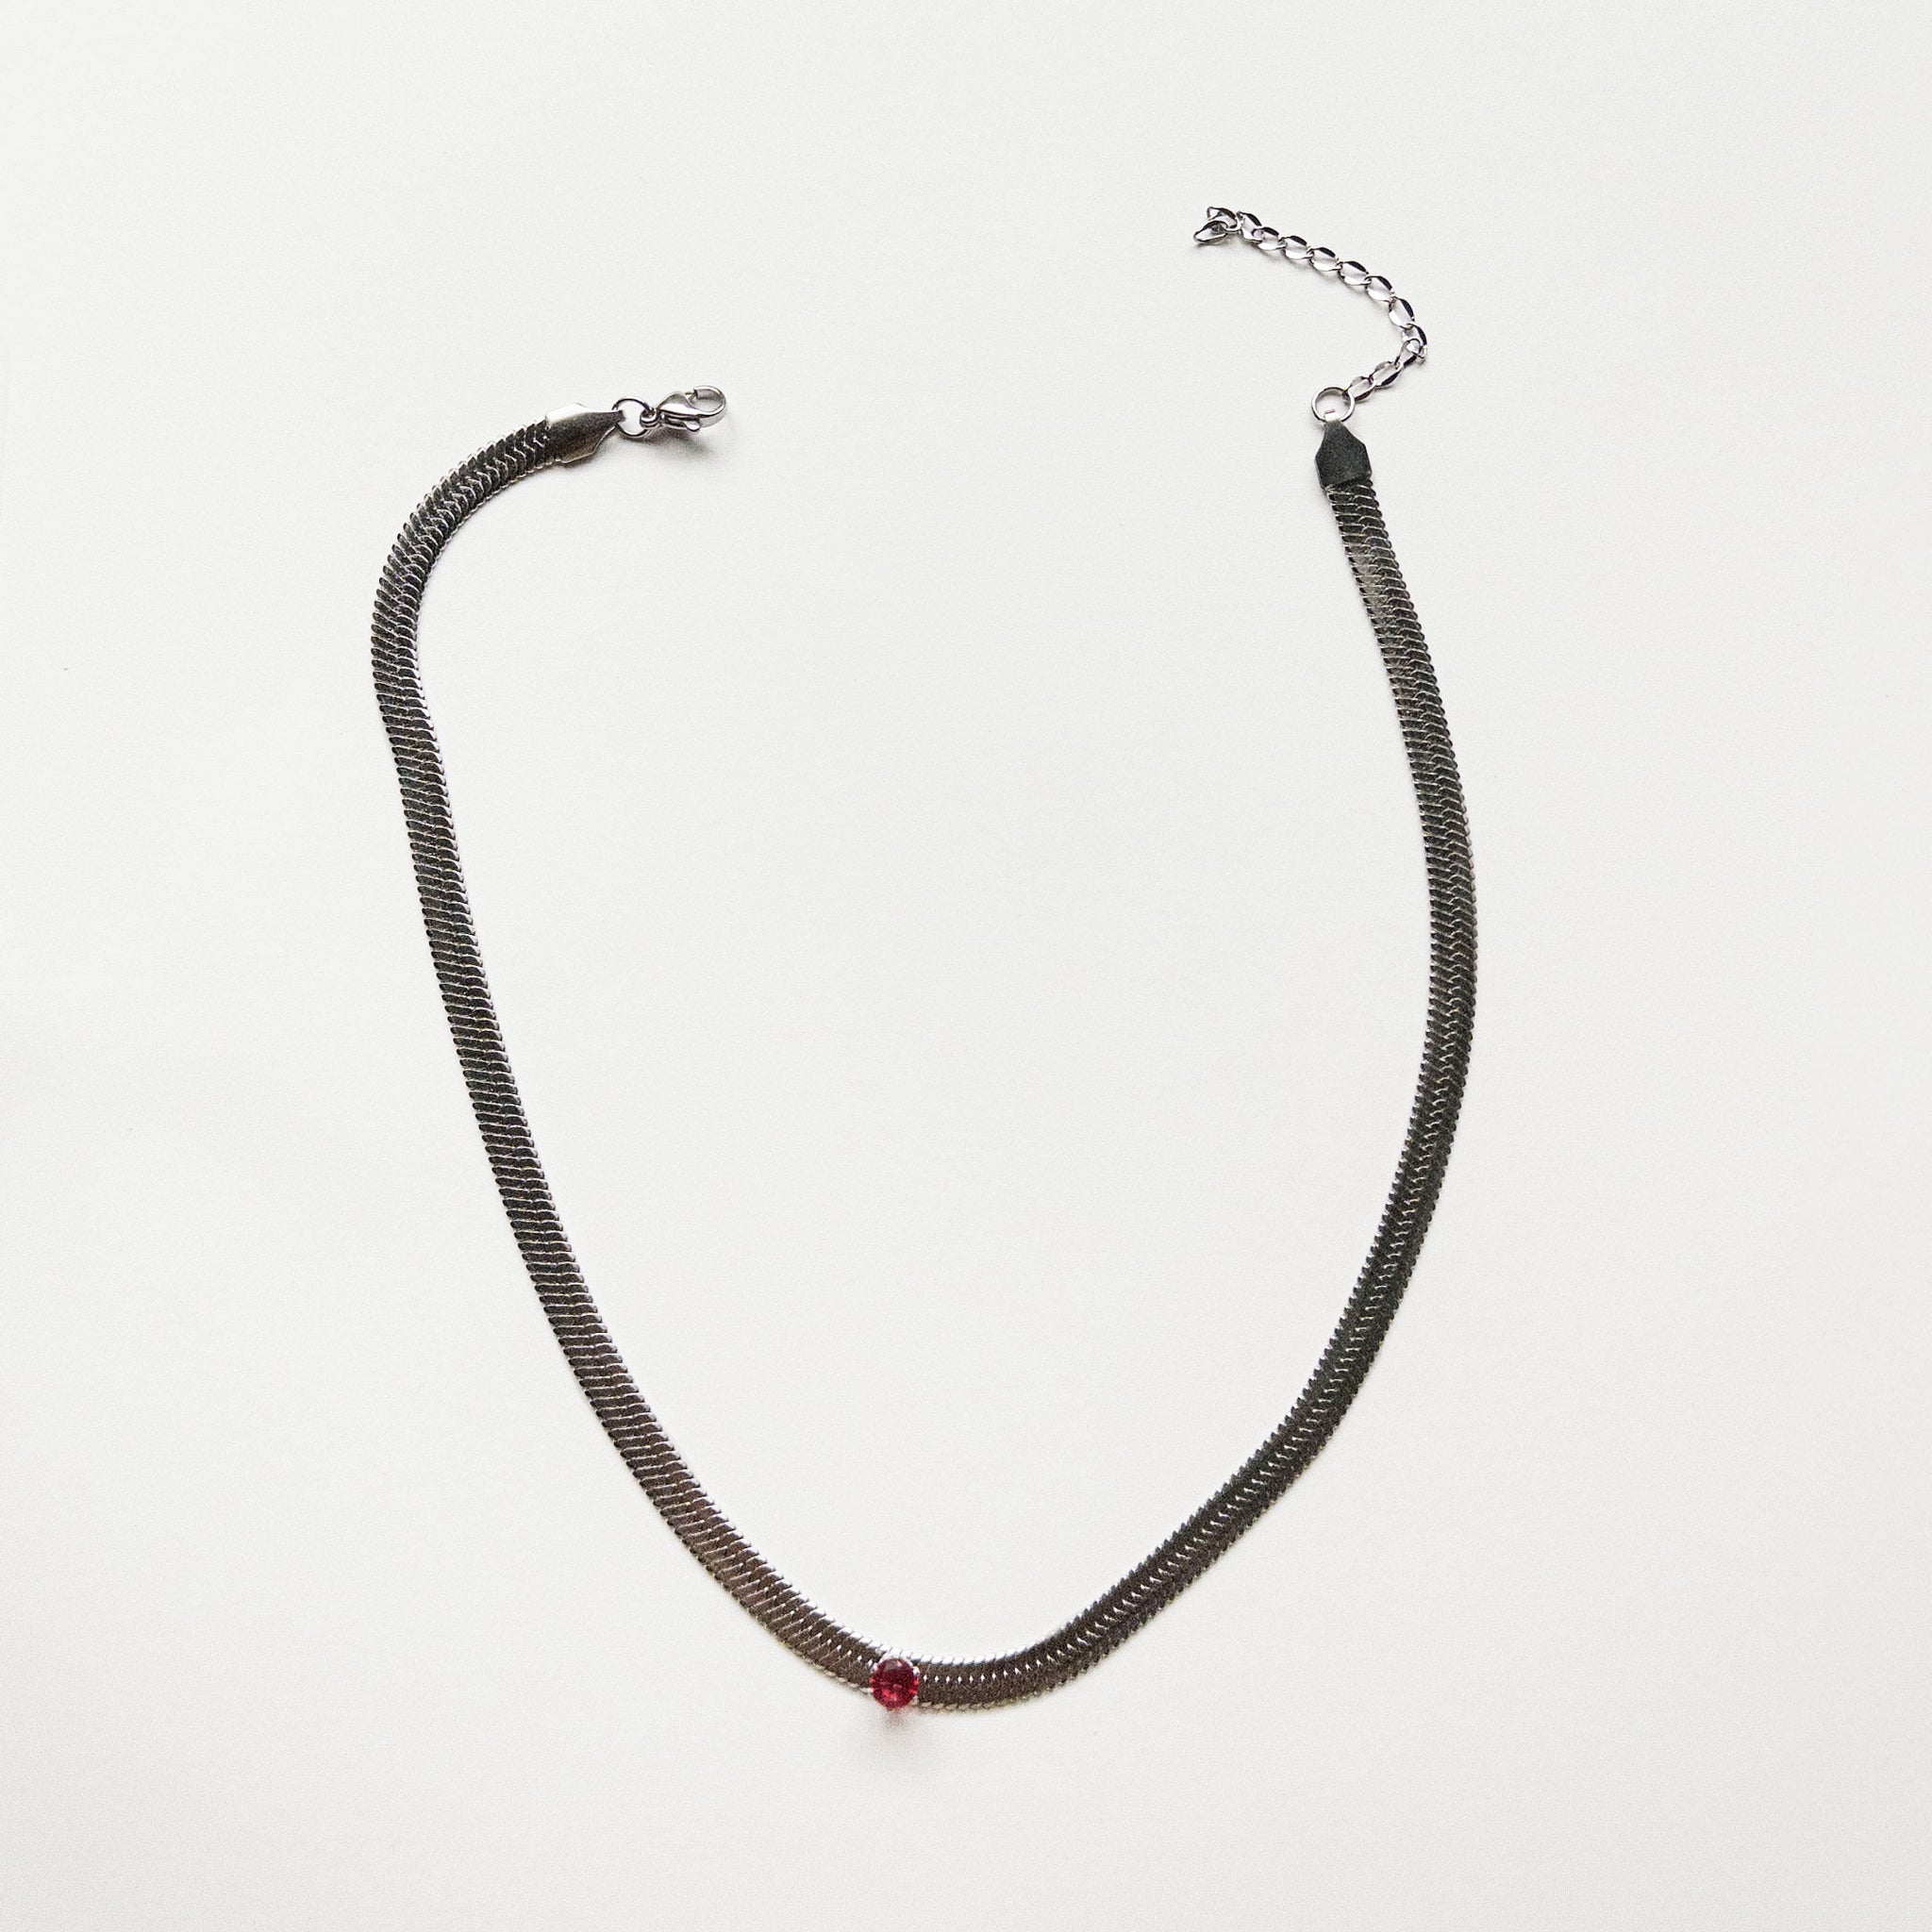 Stainless steel silver colored snake chain choker/necklace featuring a red ruby cubic zirconia gem in the center. Can be dress up or down. Perfect for layering and everyday wear. 